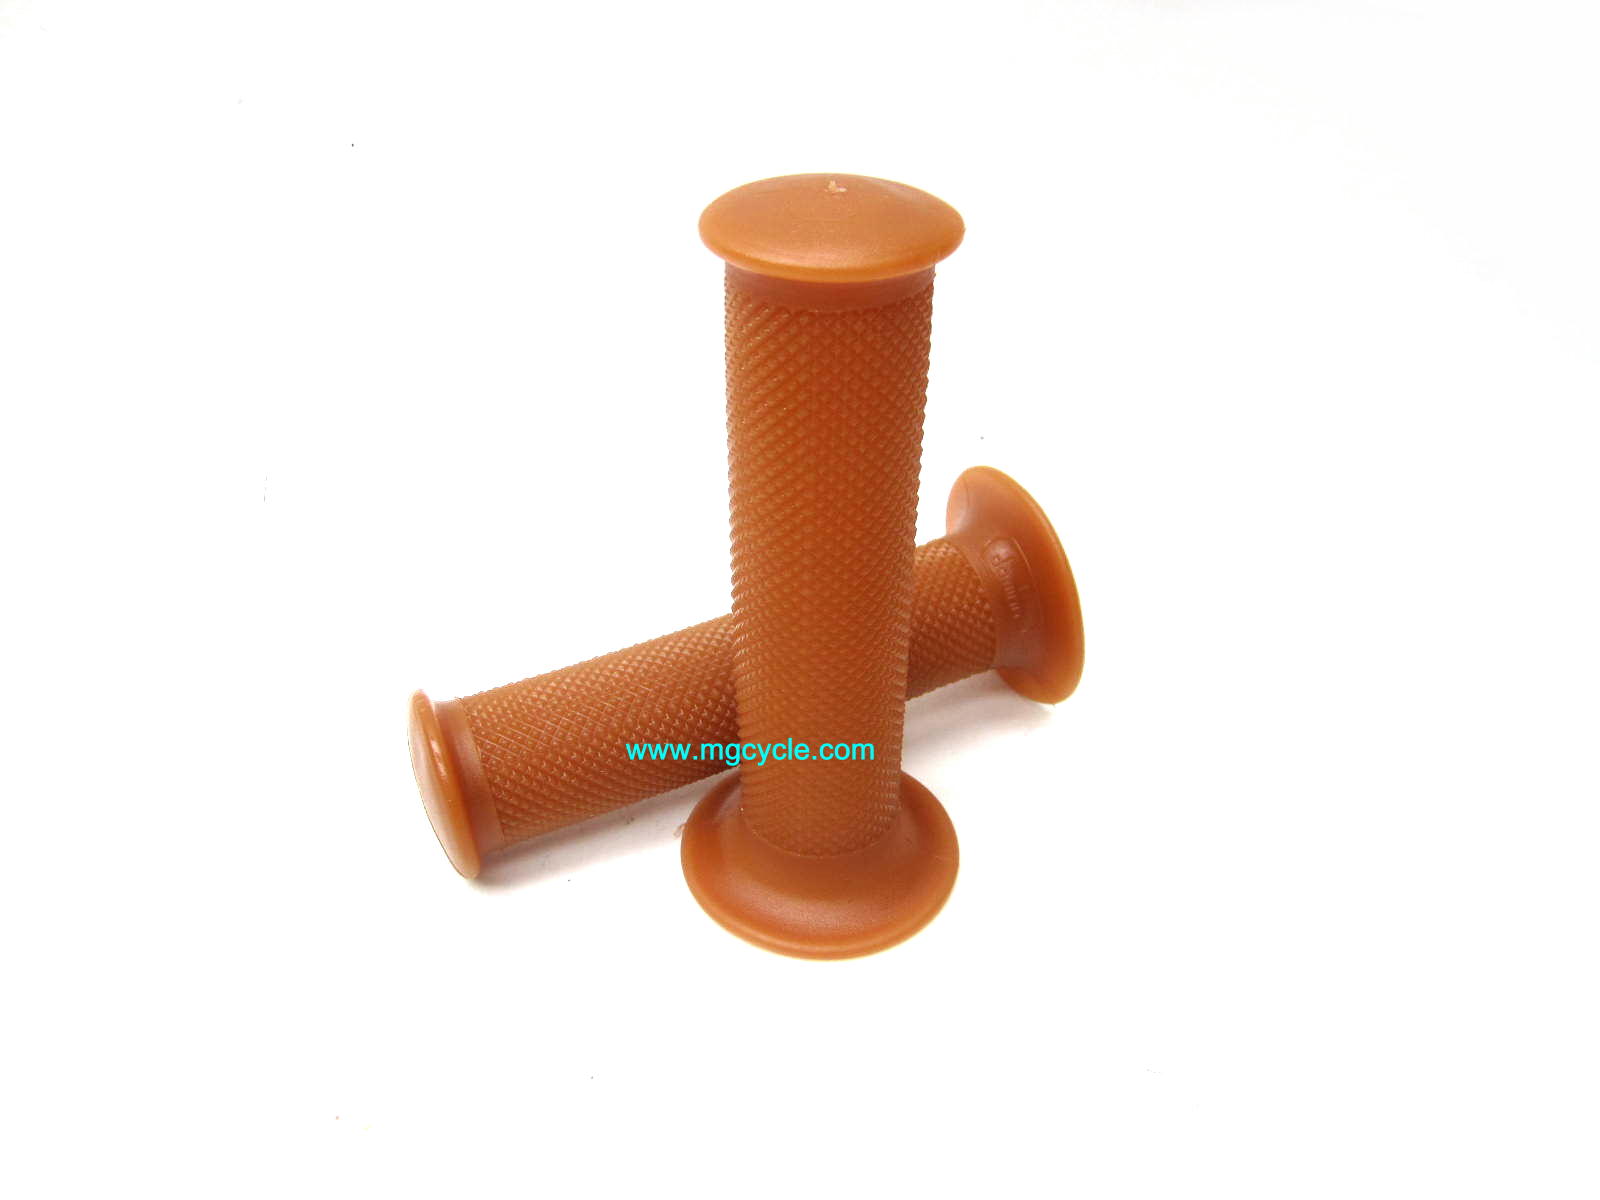 Italian Domino Cafe Racer Vintage Grips, classic natural color - Click Image to Close